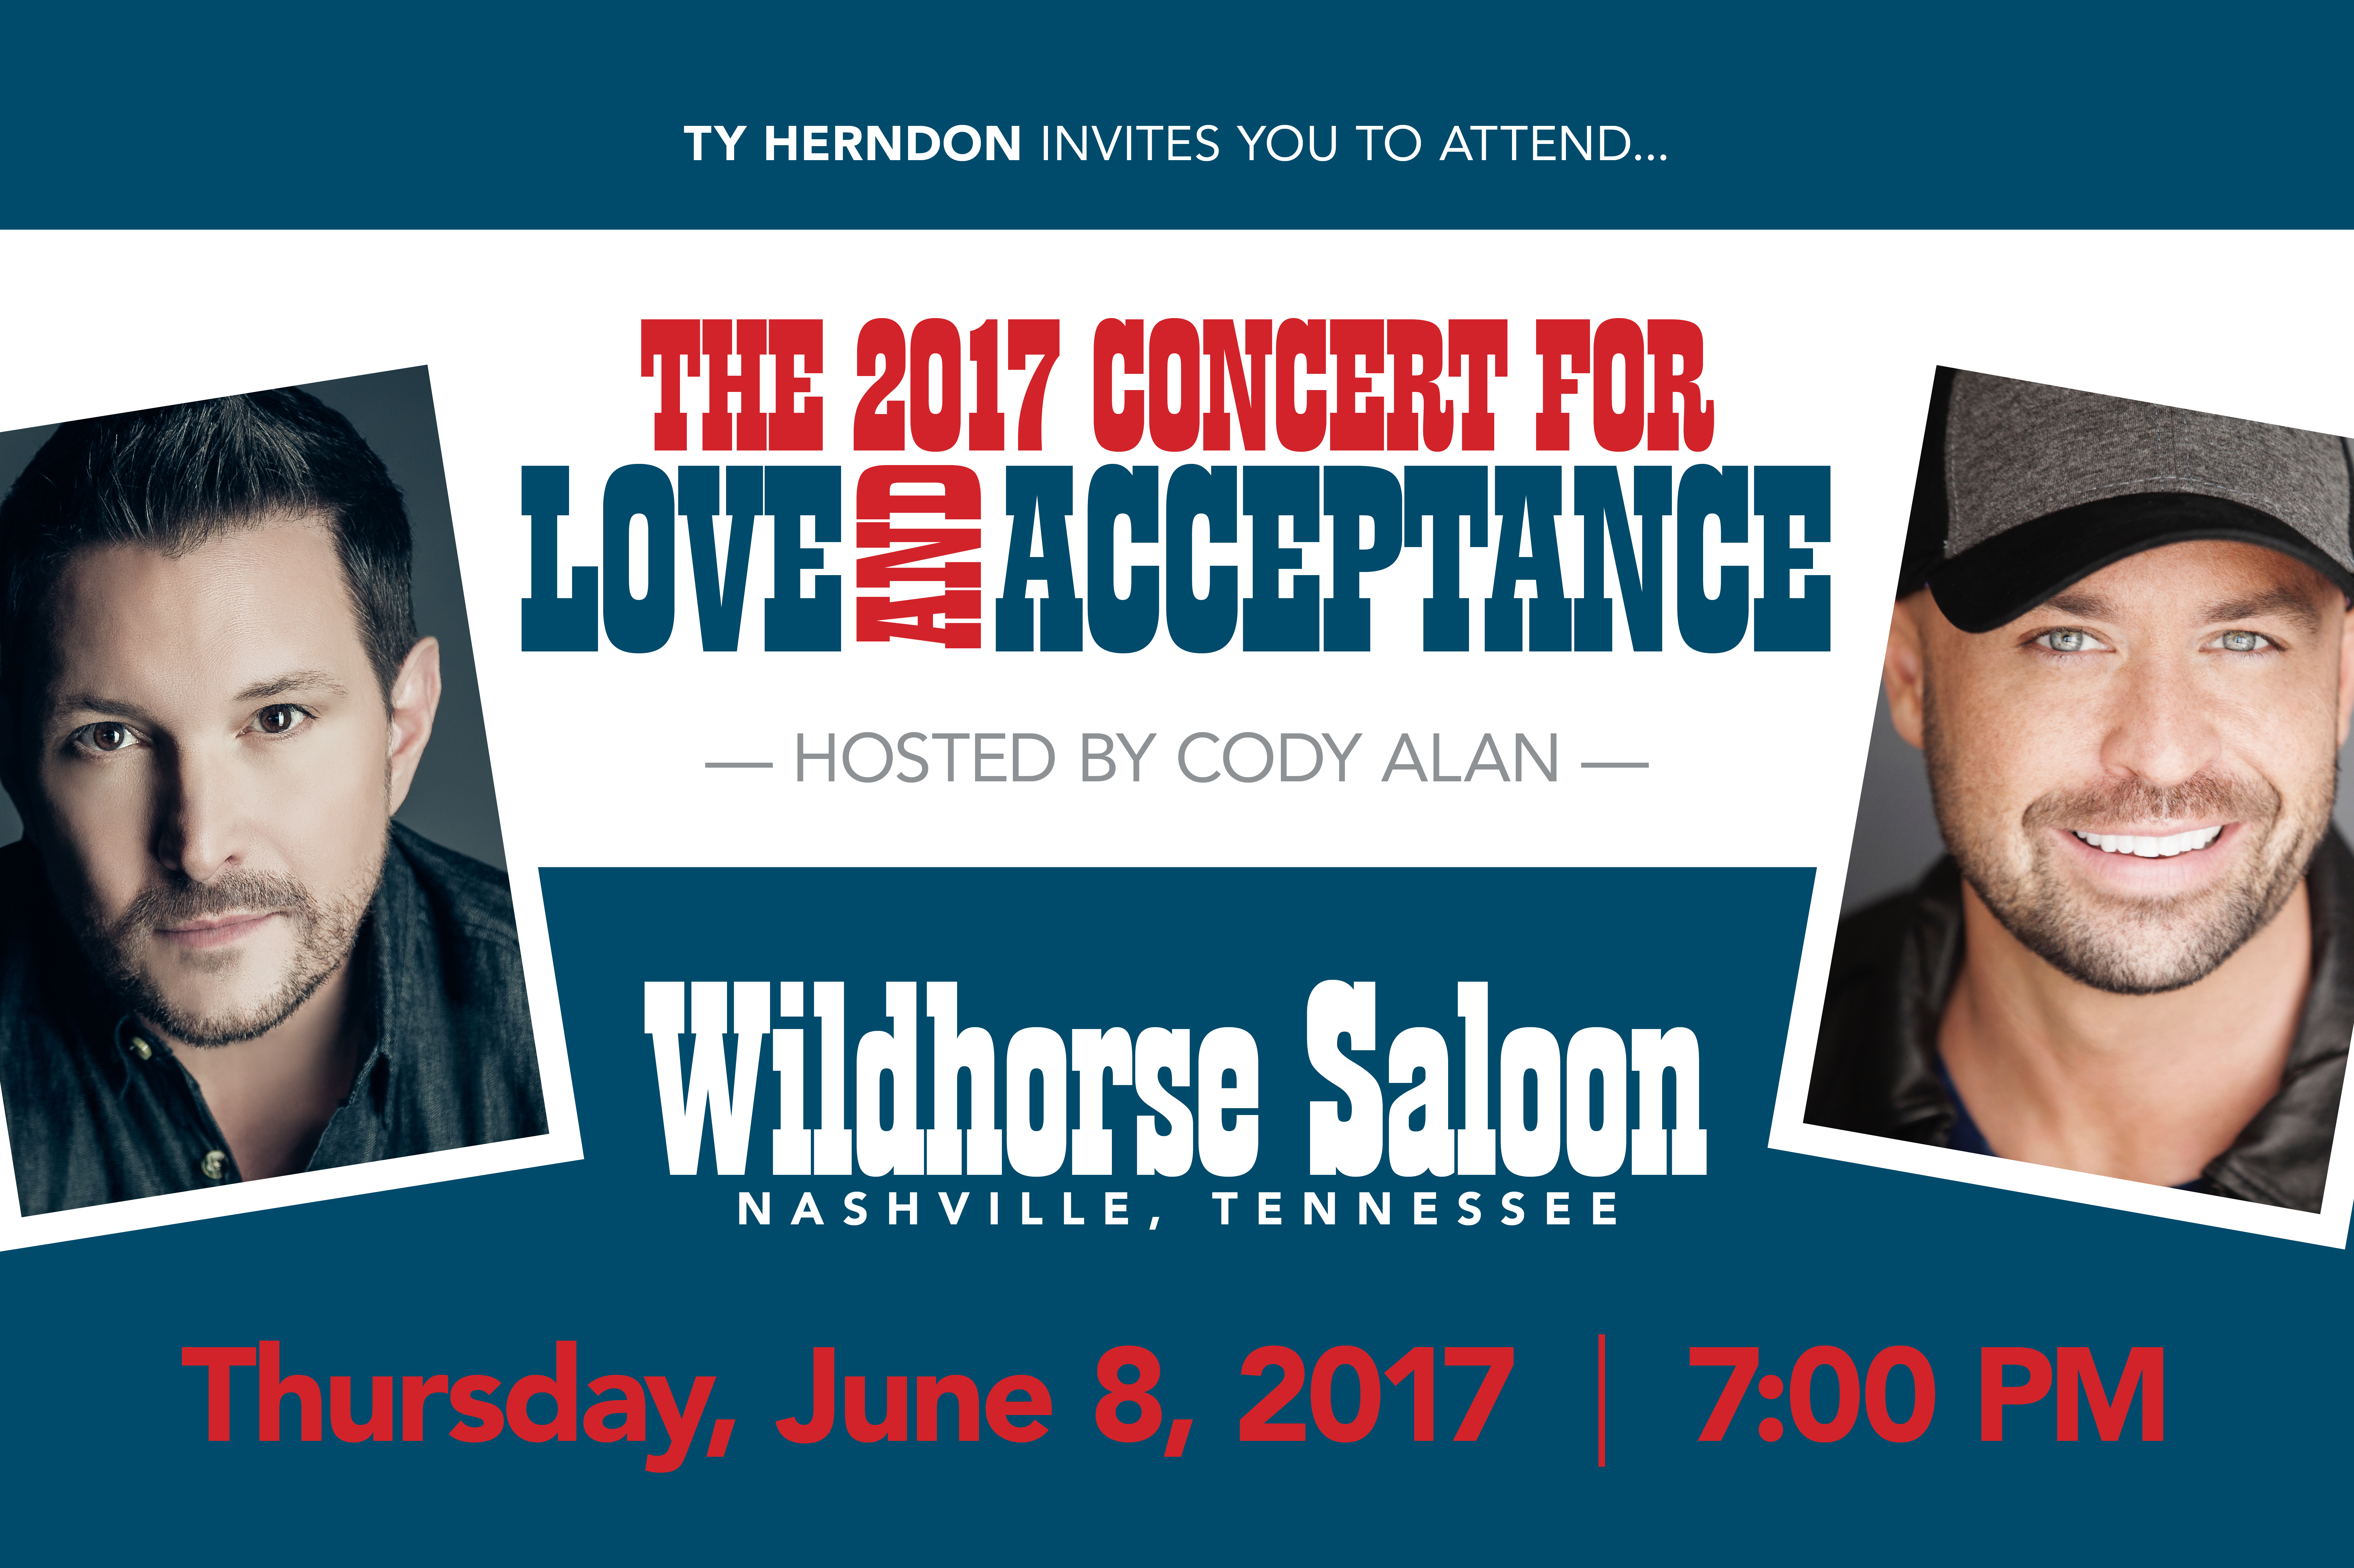 Ty Herndon’s Concert for Love and Acceptance Set to Return During CMA Fest on June 8th